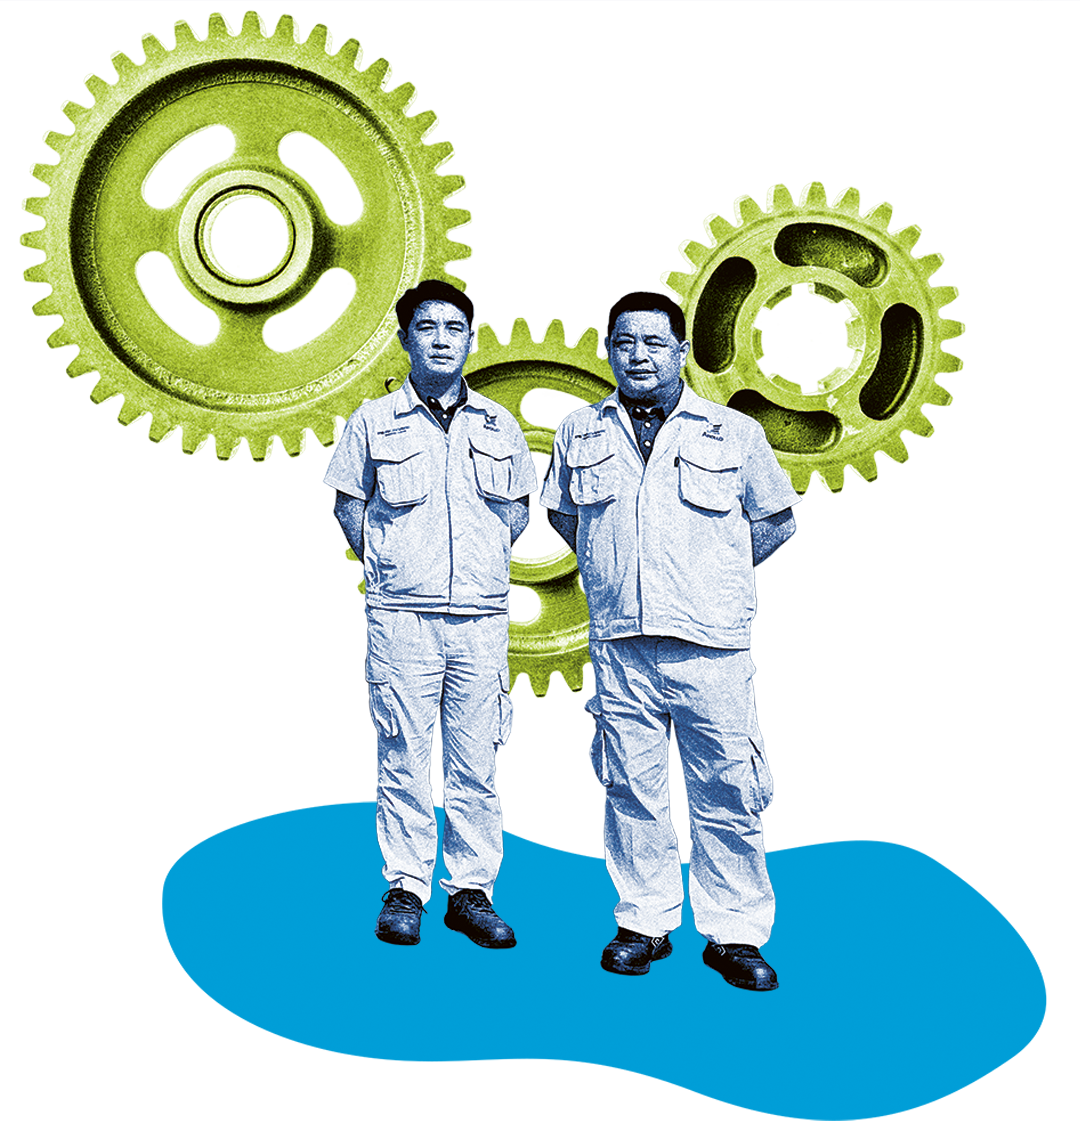 Portrait of Dinglong Luo and Huajin Luo in front of illustration of gear wheels.